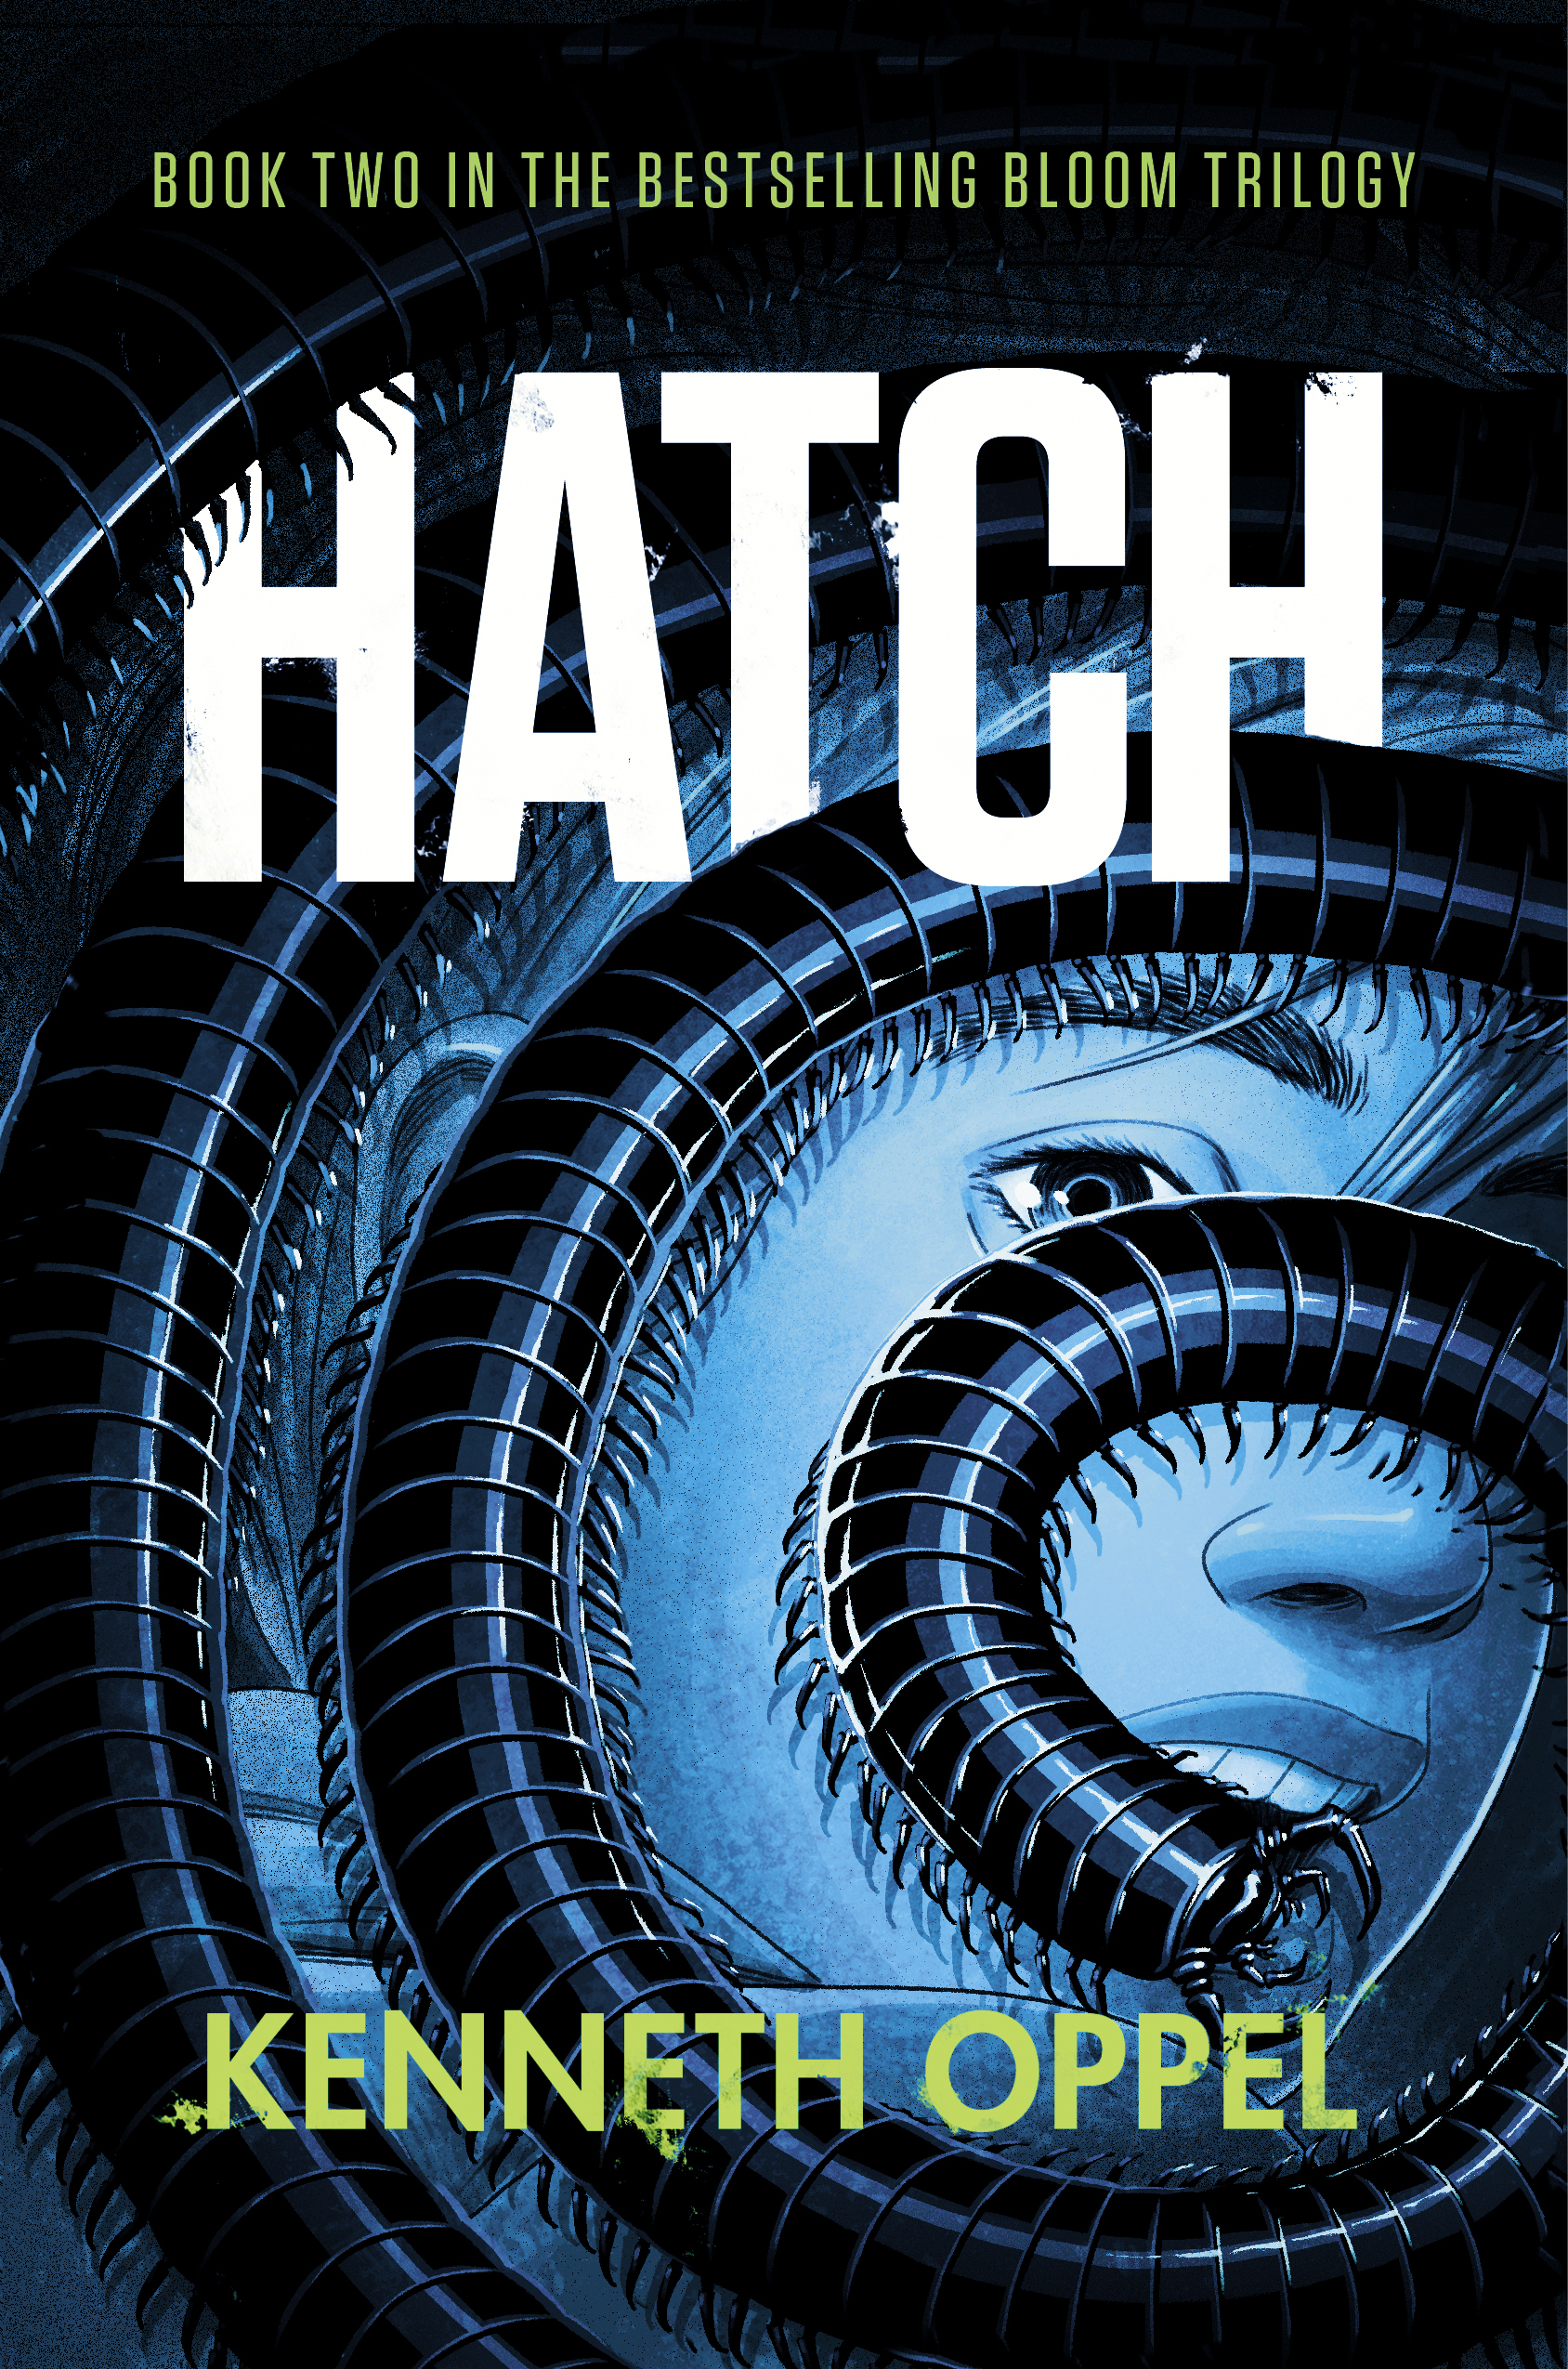 Cover art for Kennth Oppel's Hatch